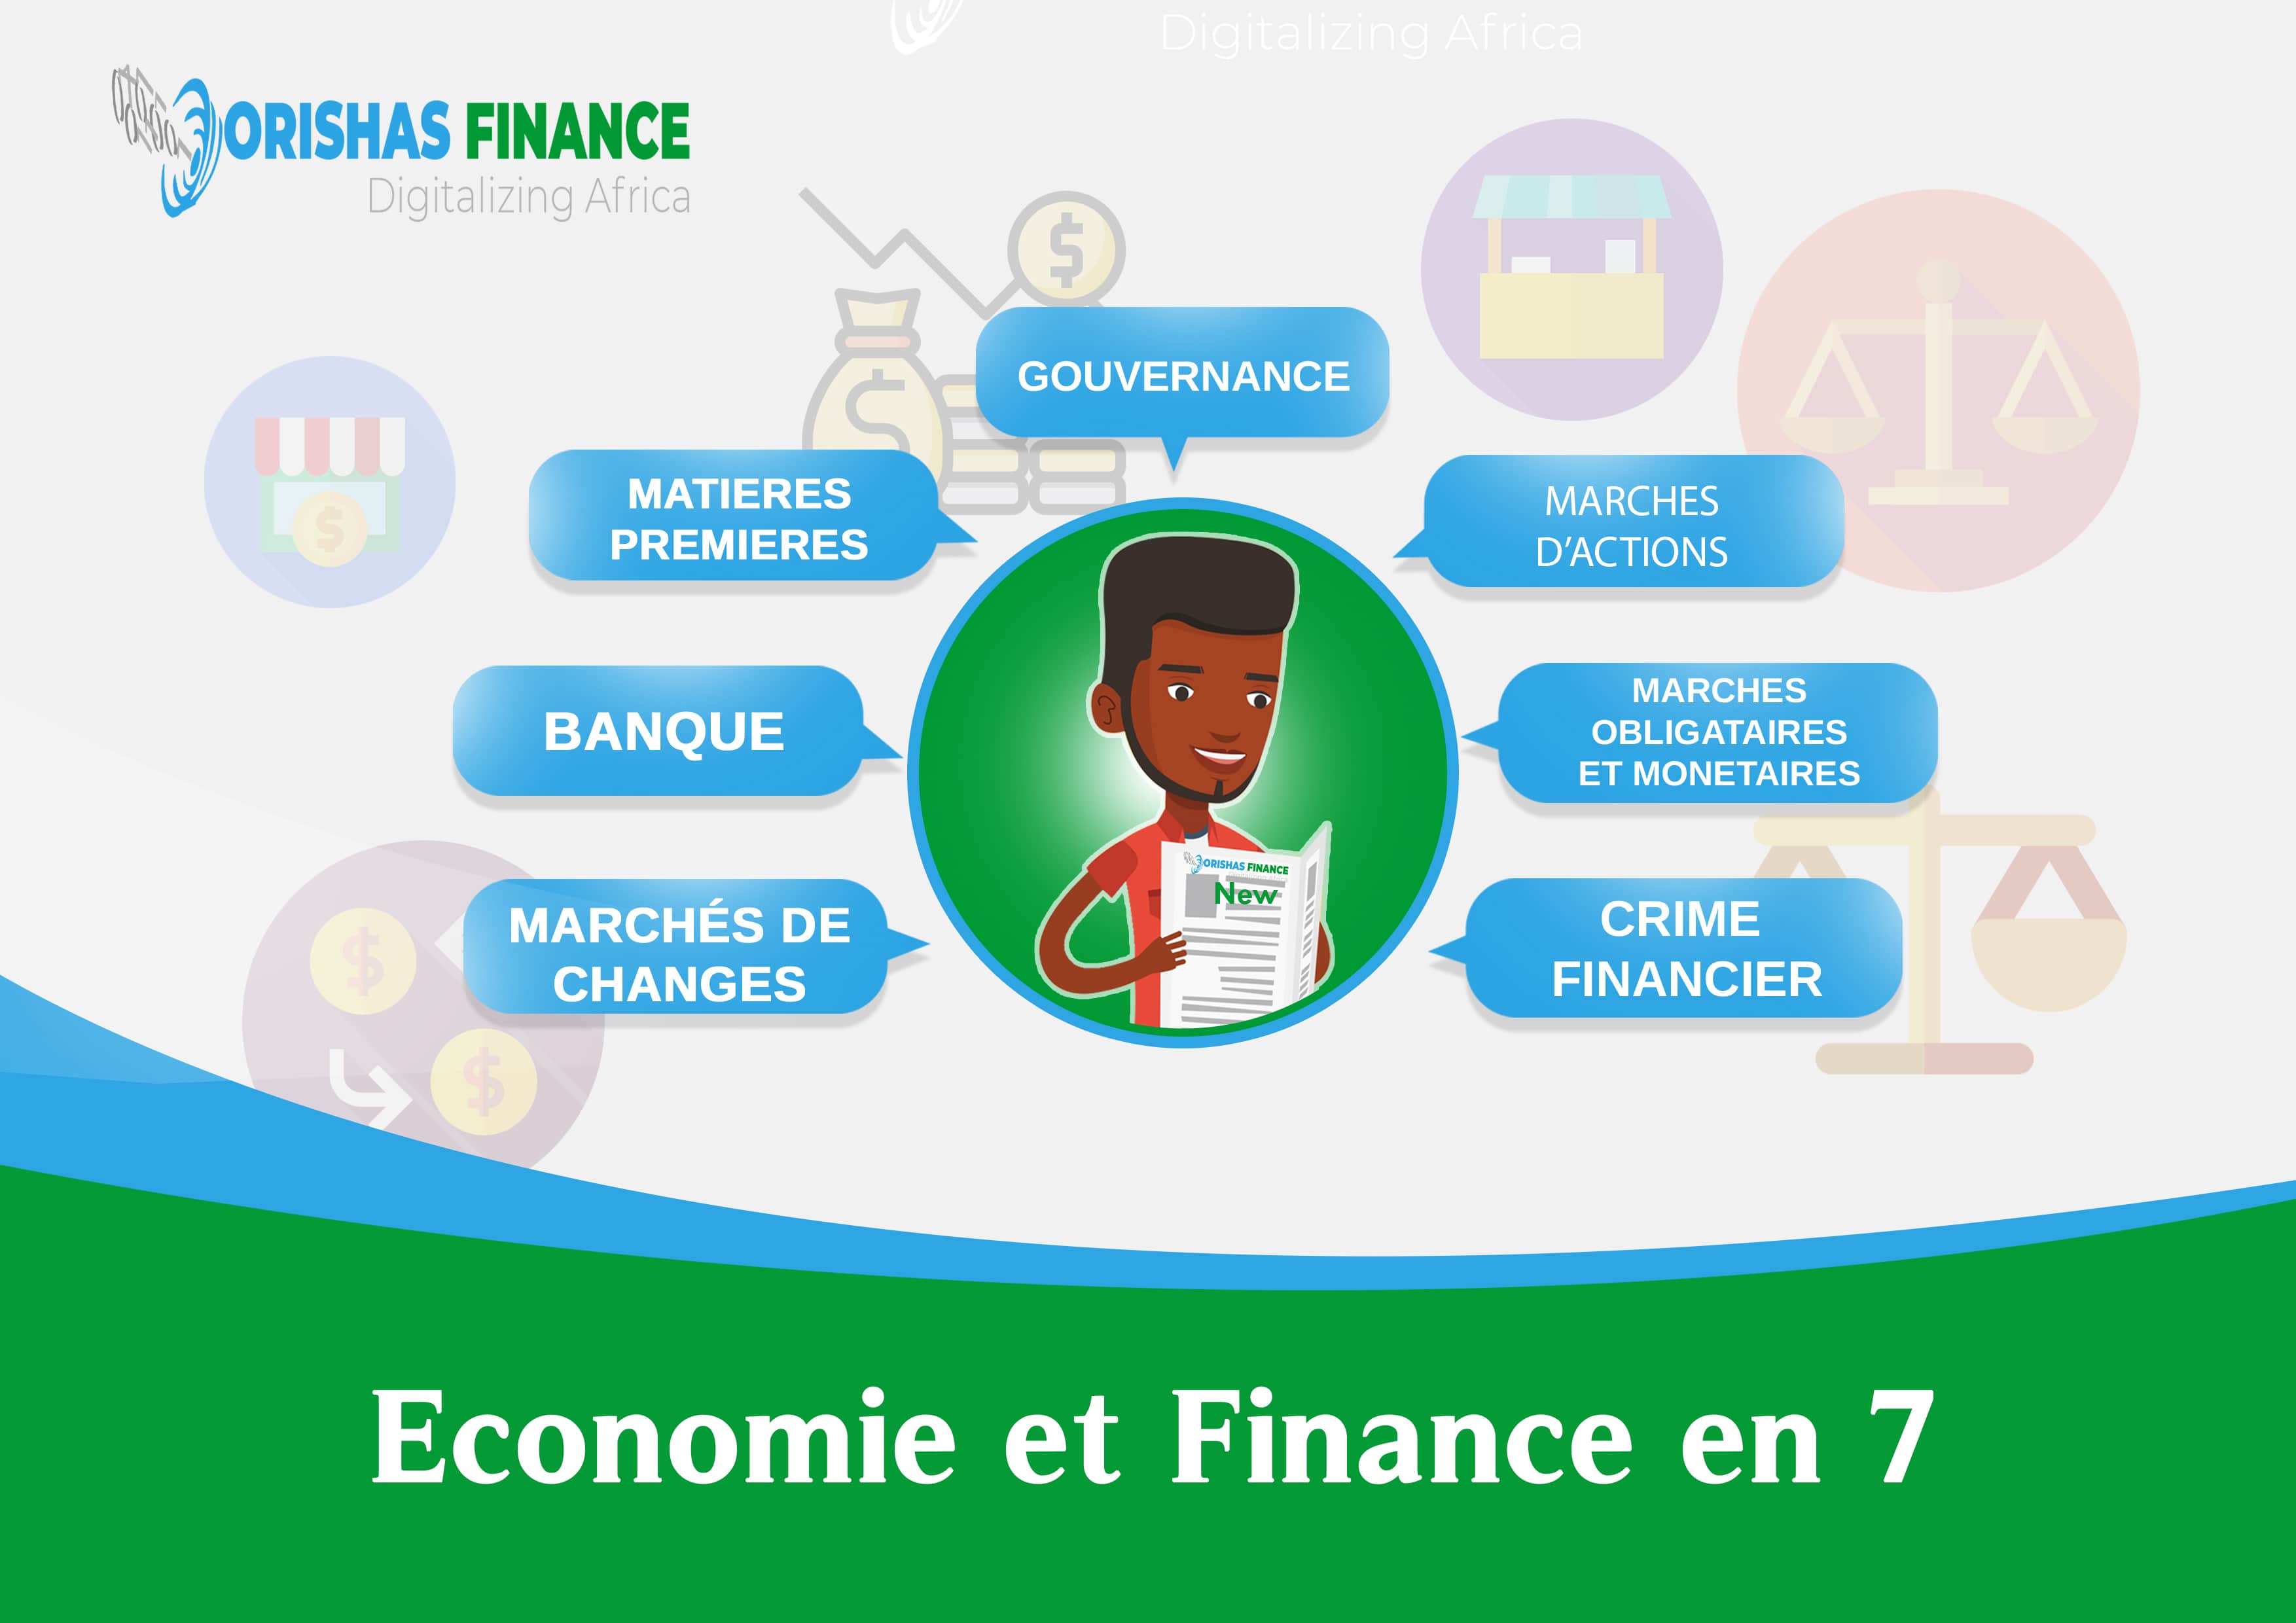  Economy and Finance in 7 from 07 to 11 June 2021 